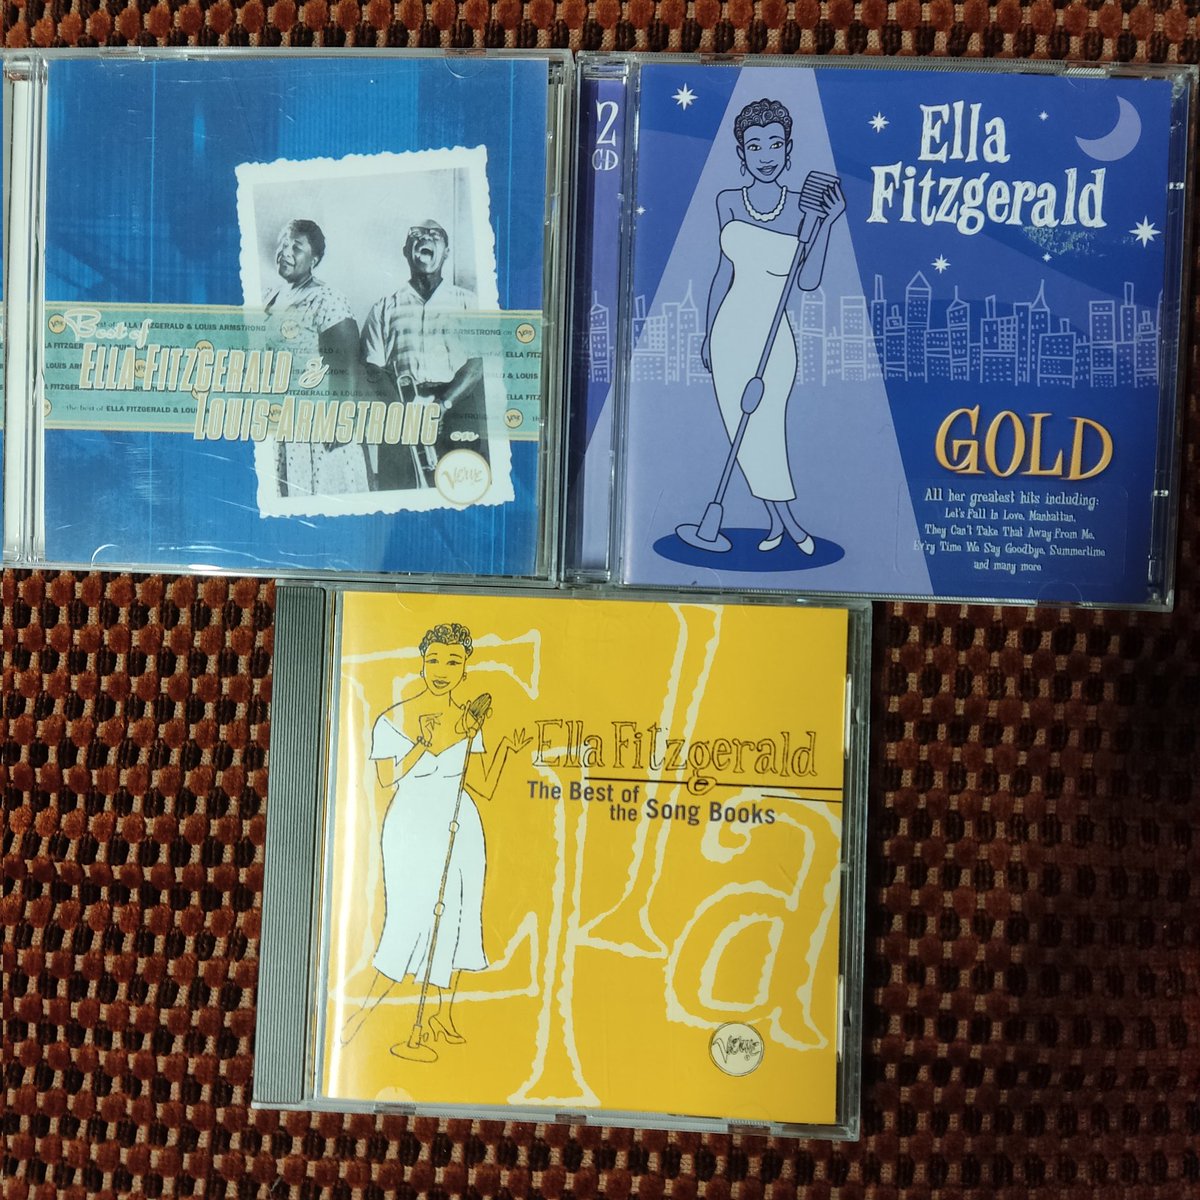 Well, the cold and damp Spring weather in England continues, so a chance to mark the birthday of one of the greatest singers of the 20th century - Ella Fitzgerald - by listening to one of these...but which one 🤔? #NowPlaying #EllaFitzgerald